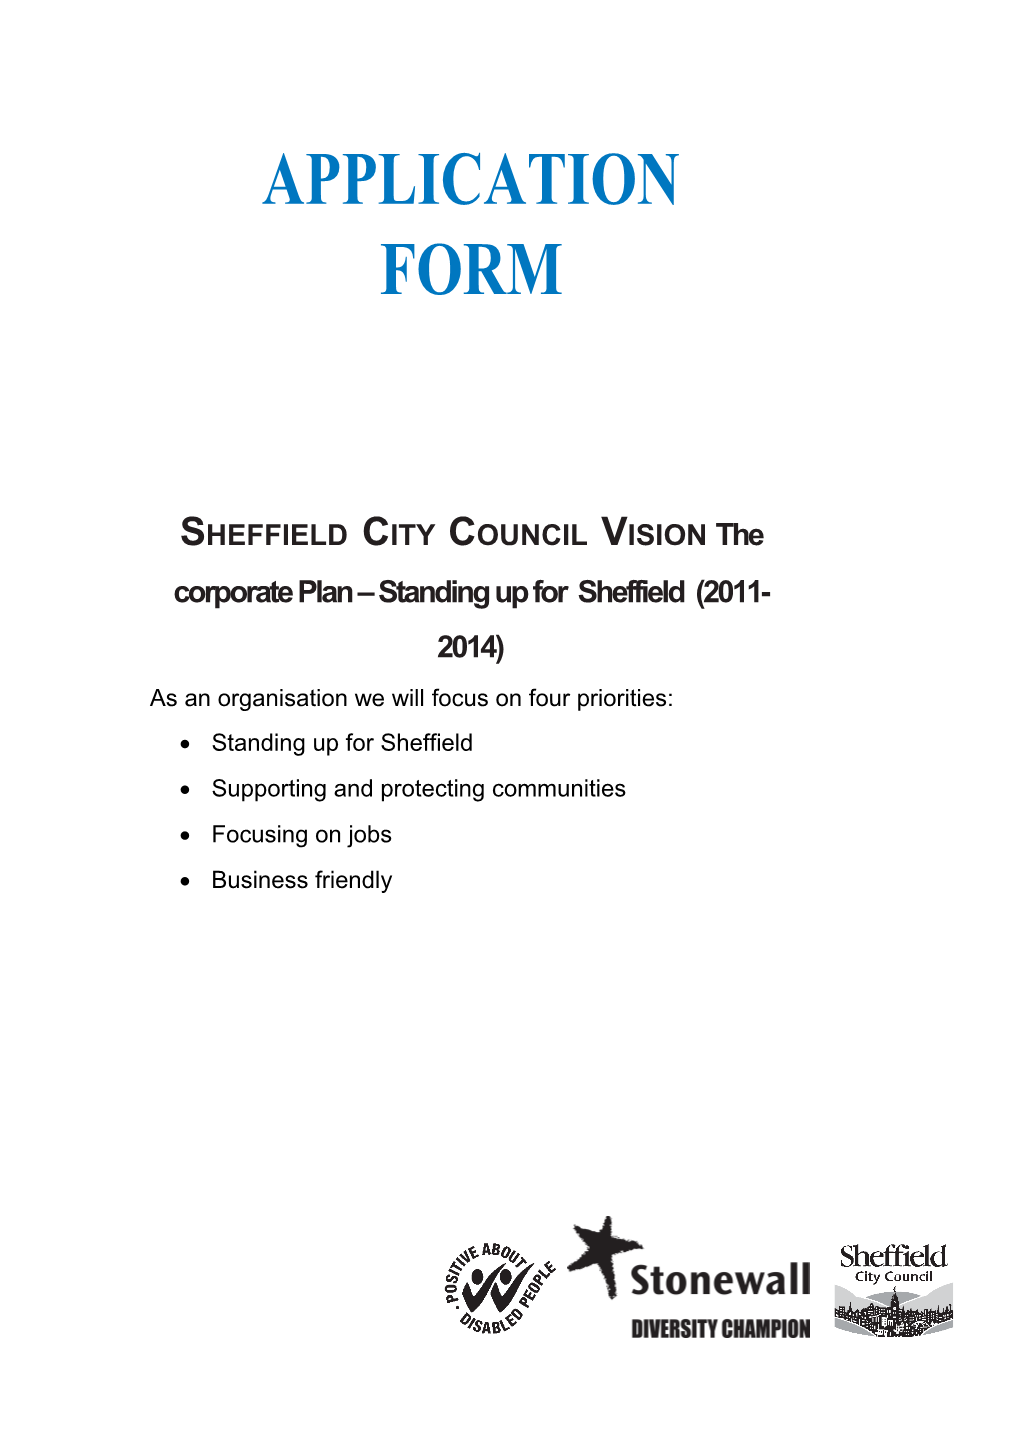 SHEFFIELDCITYCOUNCILVISION the Corporate Plan Standing up for Sheffield (2011-2014)